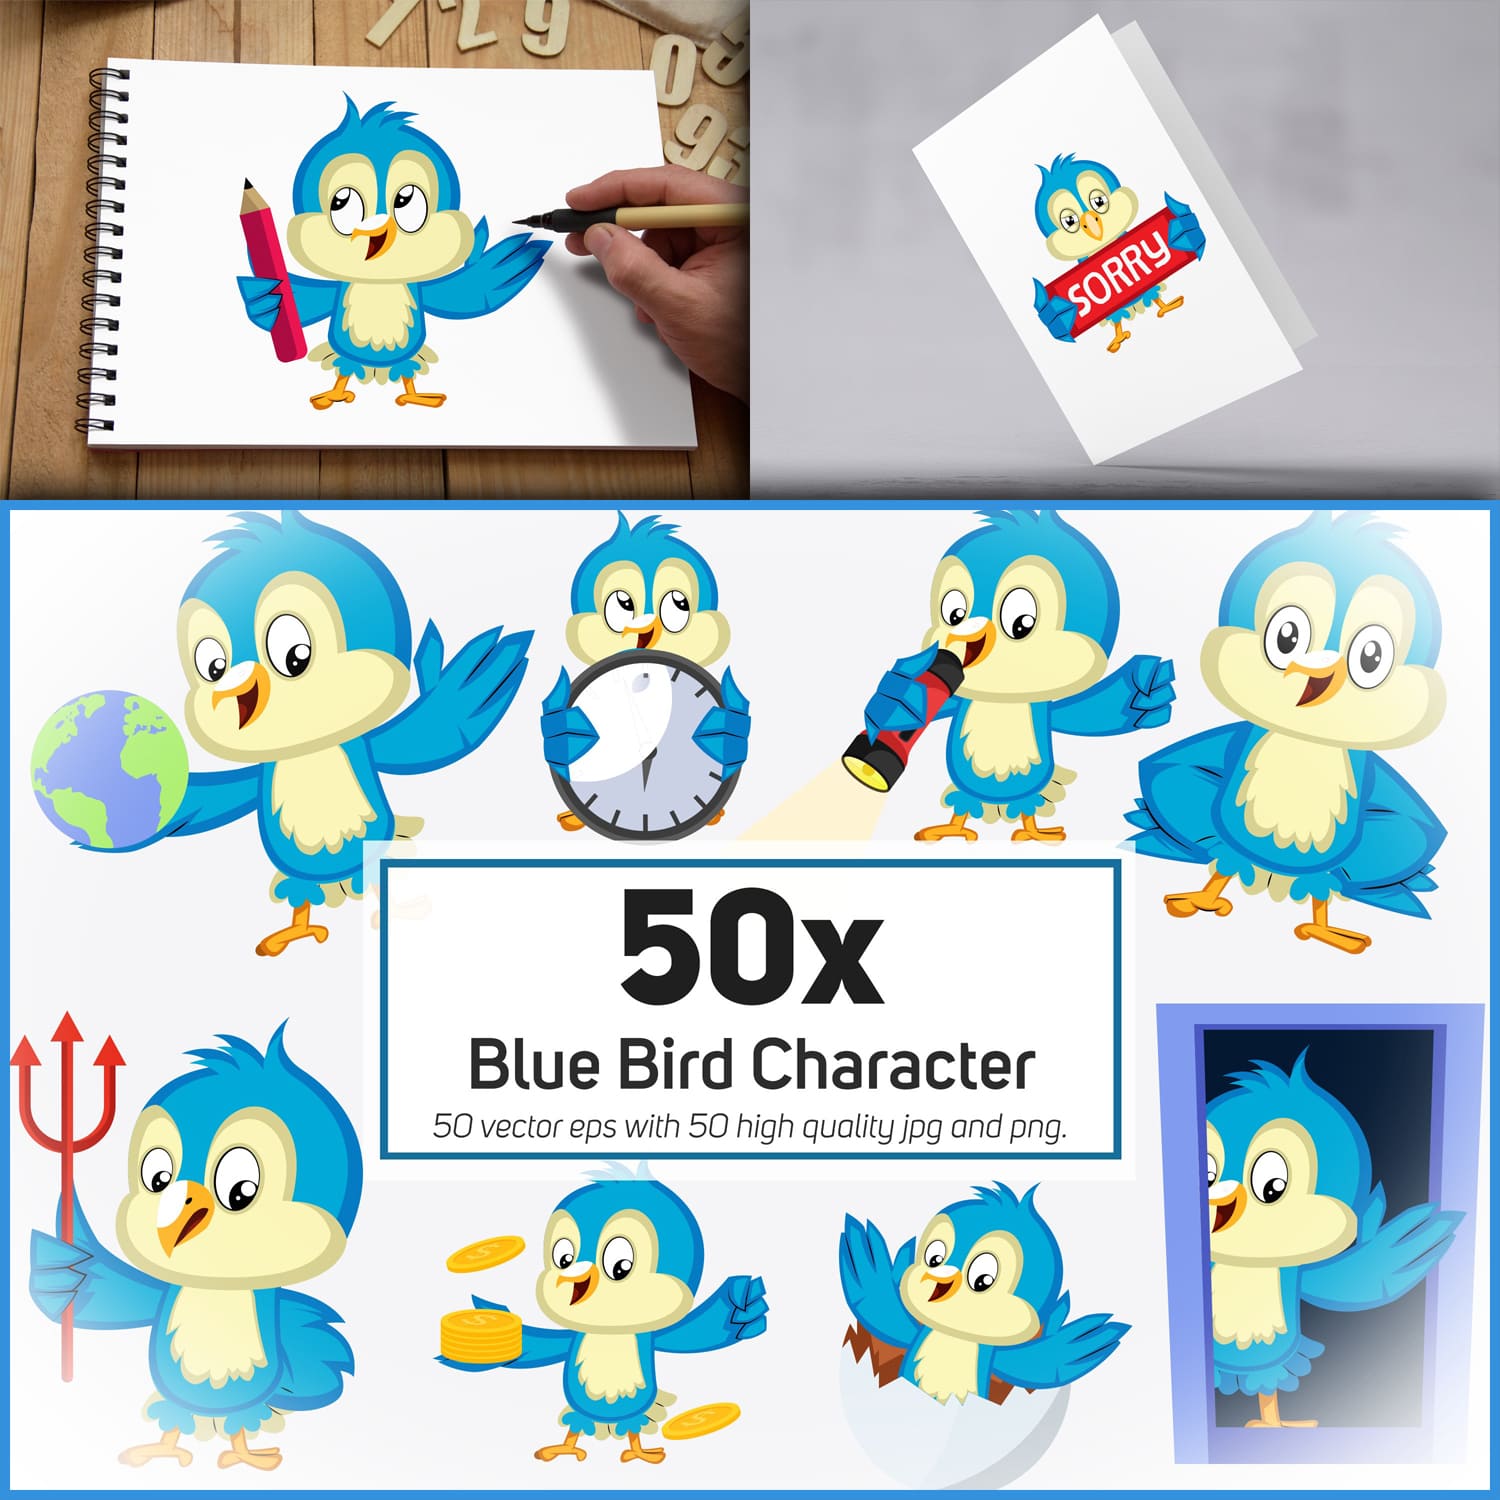 Preview blue bird character collection illustration.